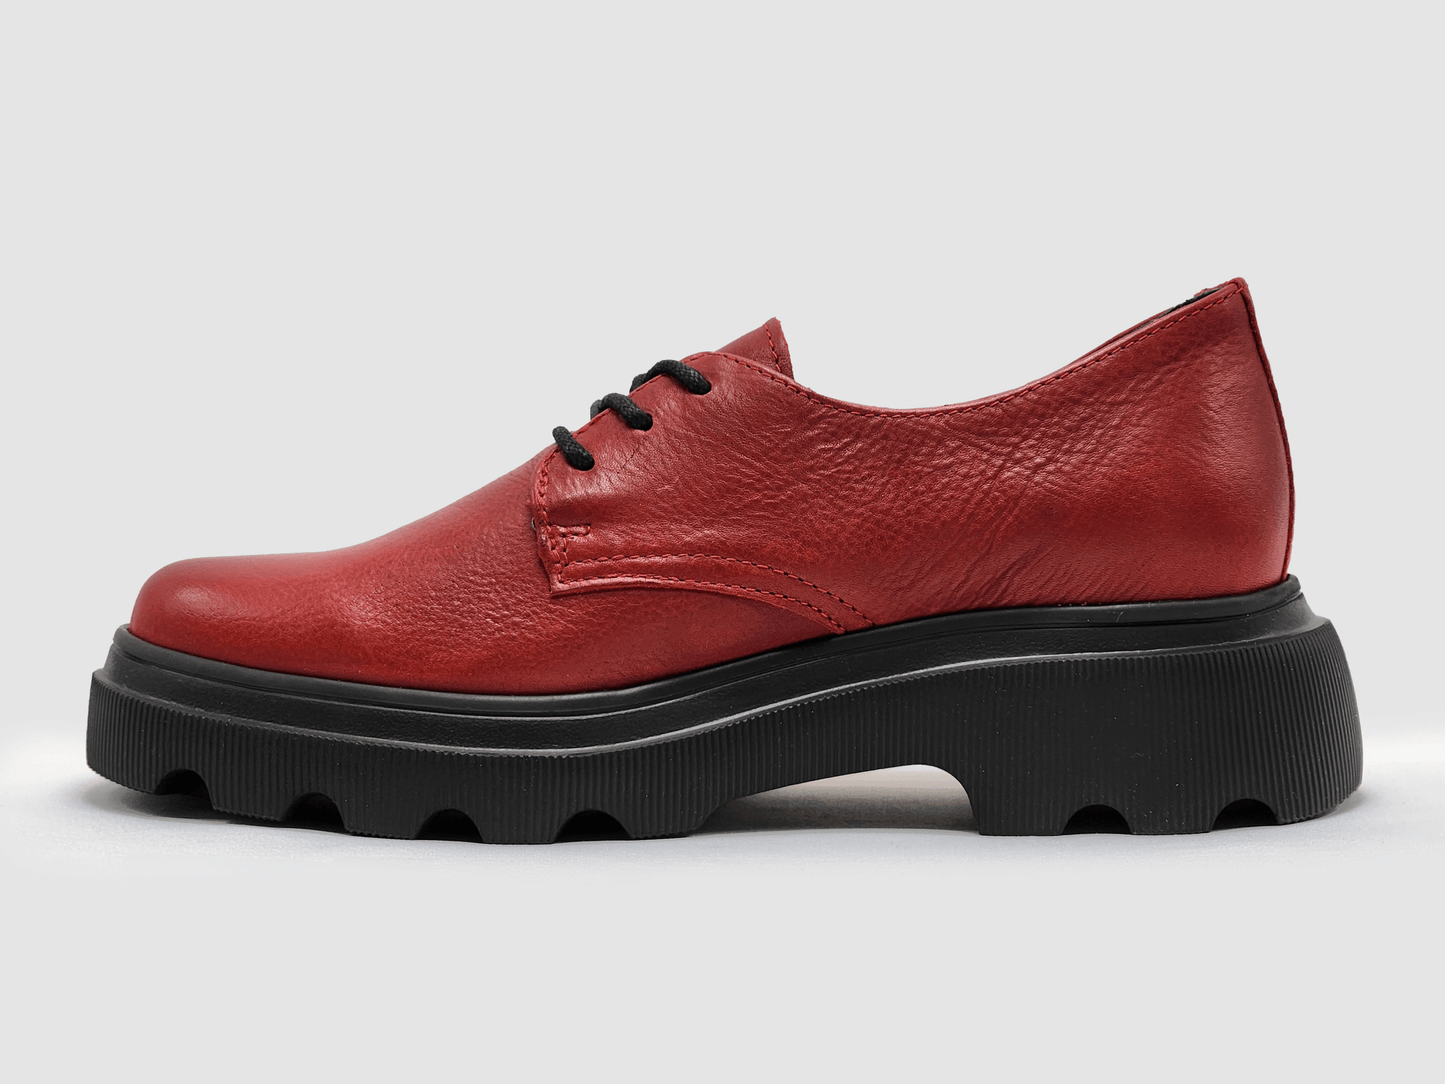 Women's Modern Low-Top Leather Shoes - Red - Kacper Global Shoes 